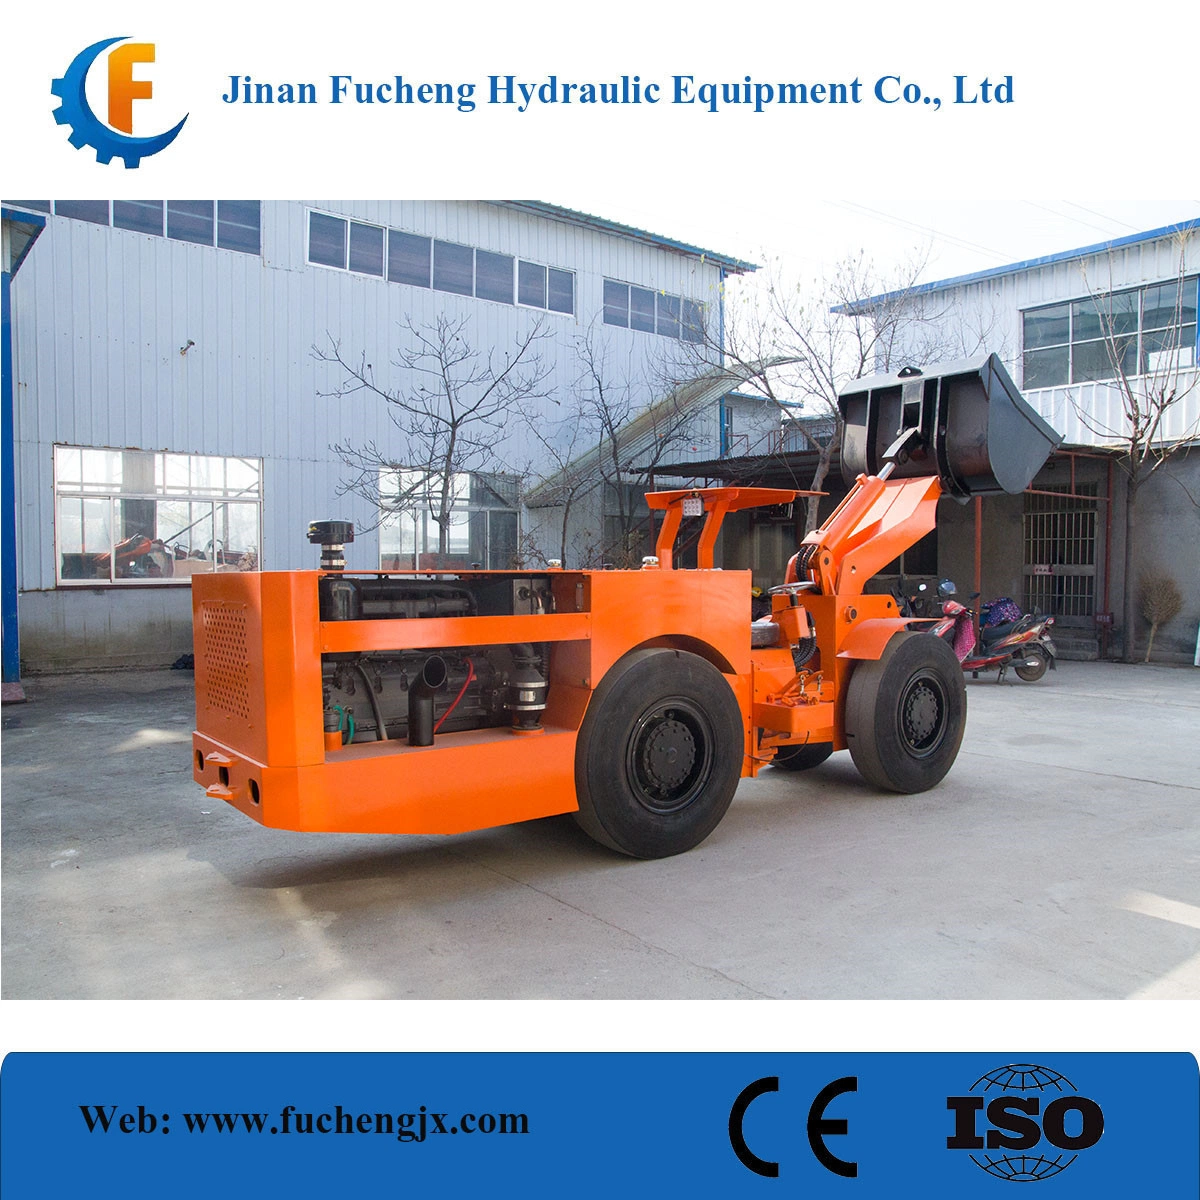 Hot sale 1.5 cbm diesel underground loader/ scooptram for mining with less noise